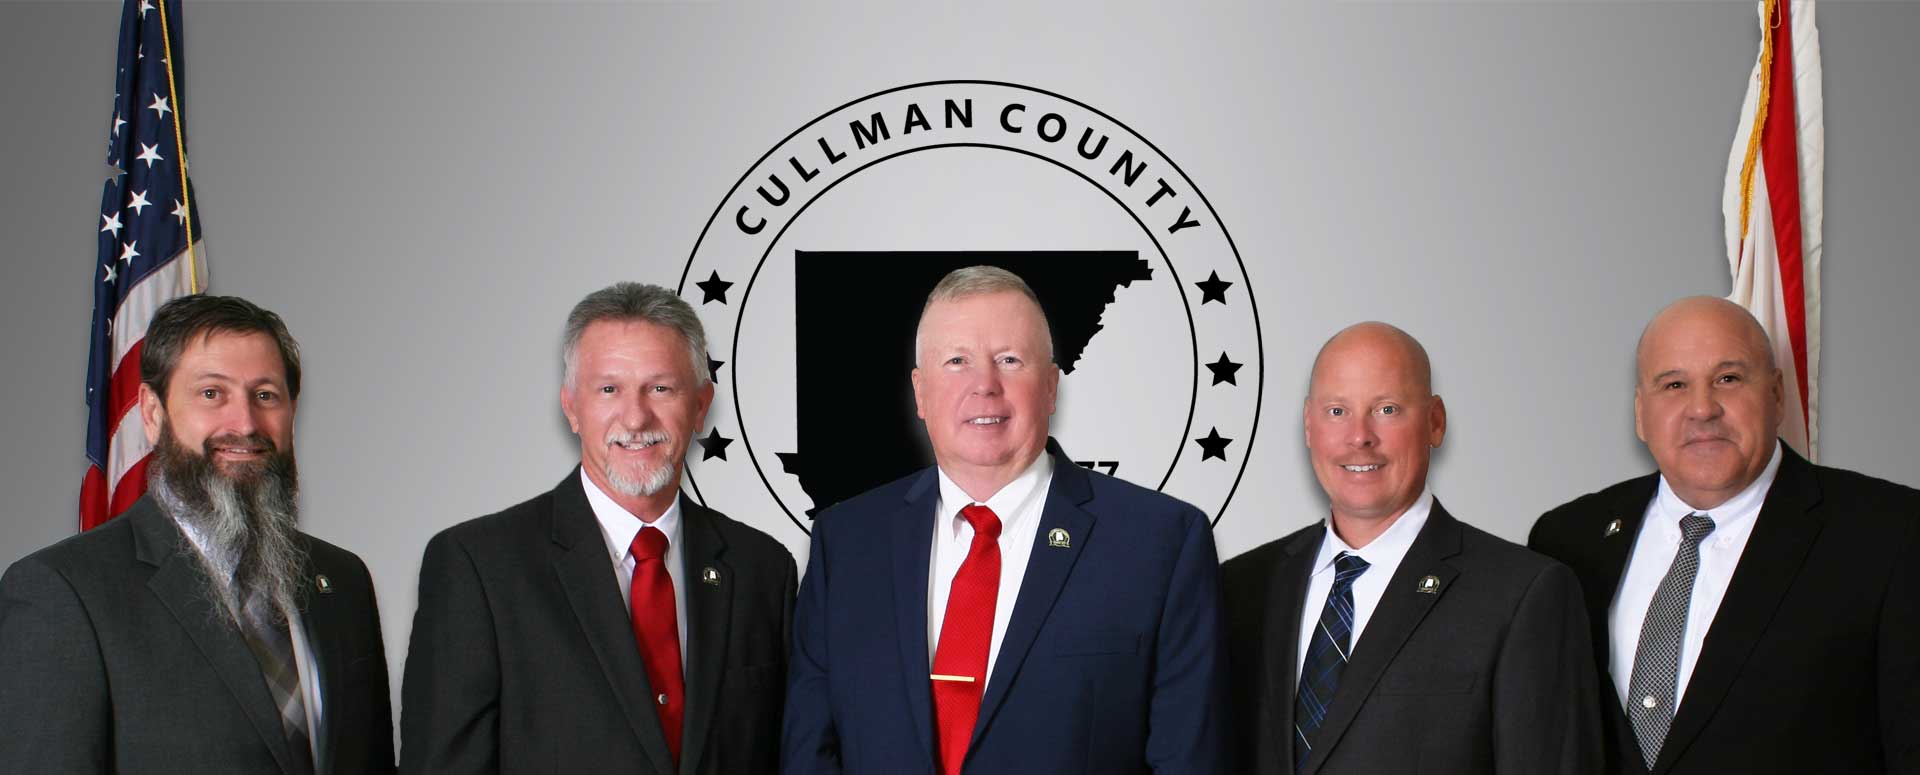 2020 County Commission... Commissioner Kelly Duke, Commissioner Kerry Watson, Chairman Jeff Clemons, Commissioner Corey Freeman, Commissioner Garry Marchman